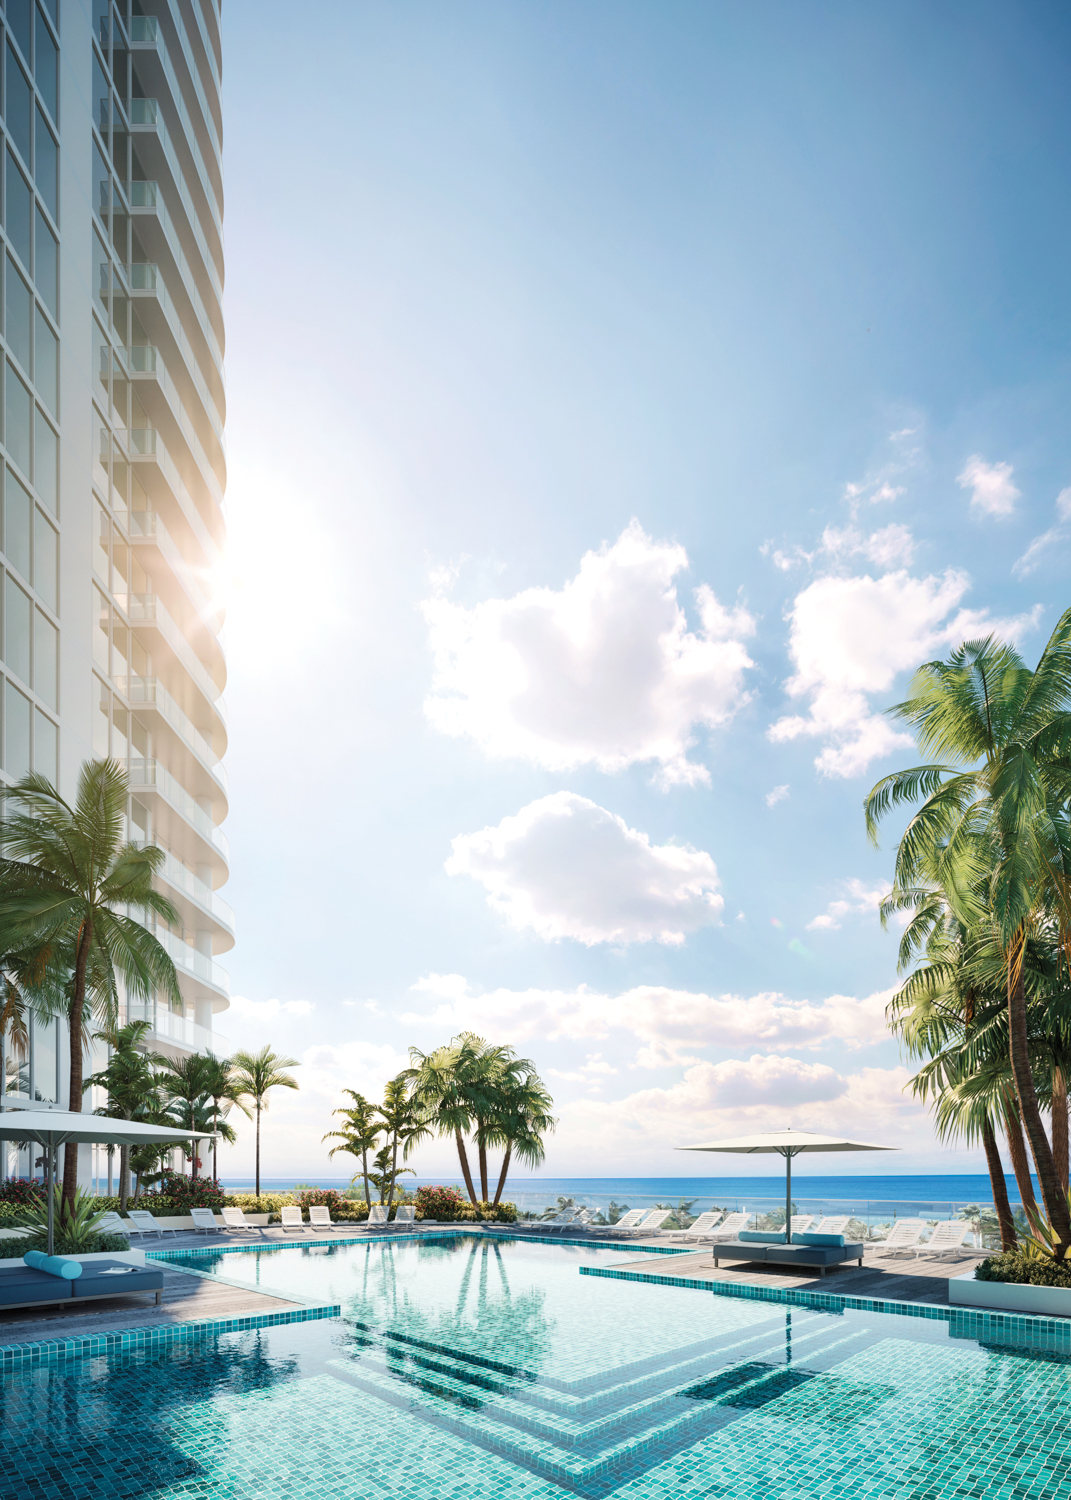 Pool deck with palm trees at Fort Lauderdale luxury high-rise